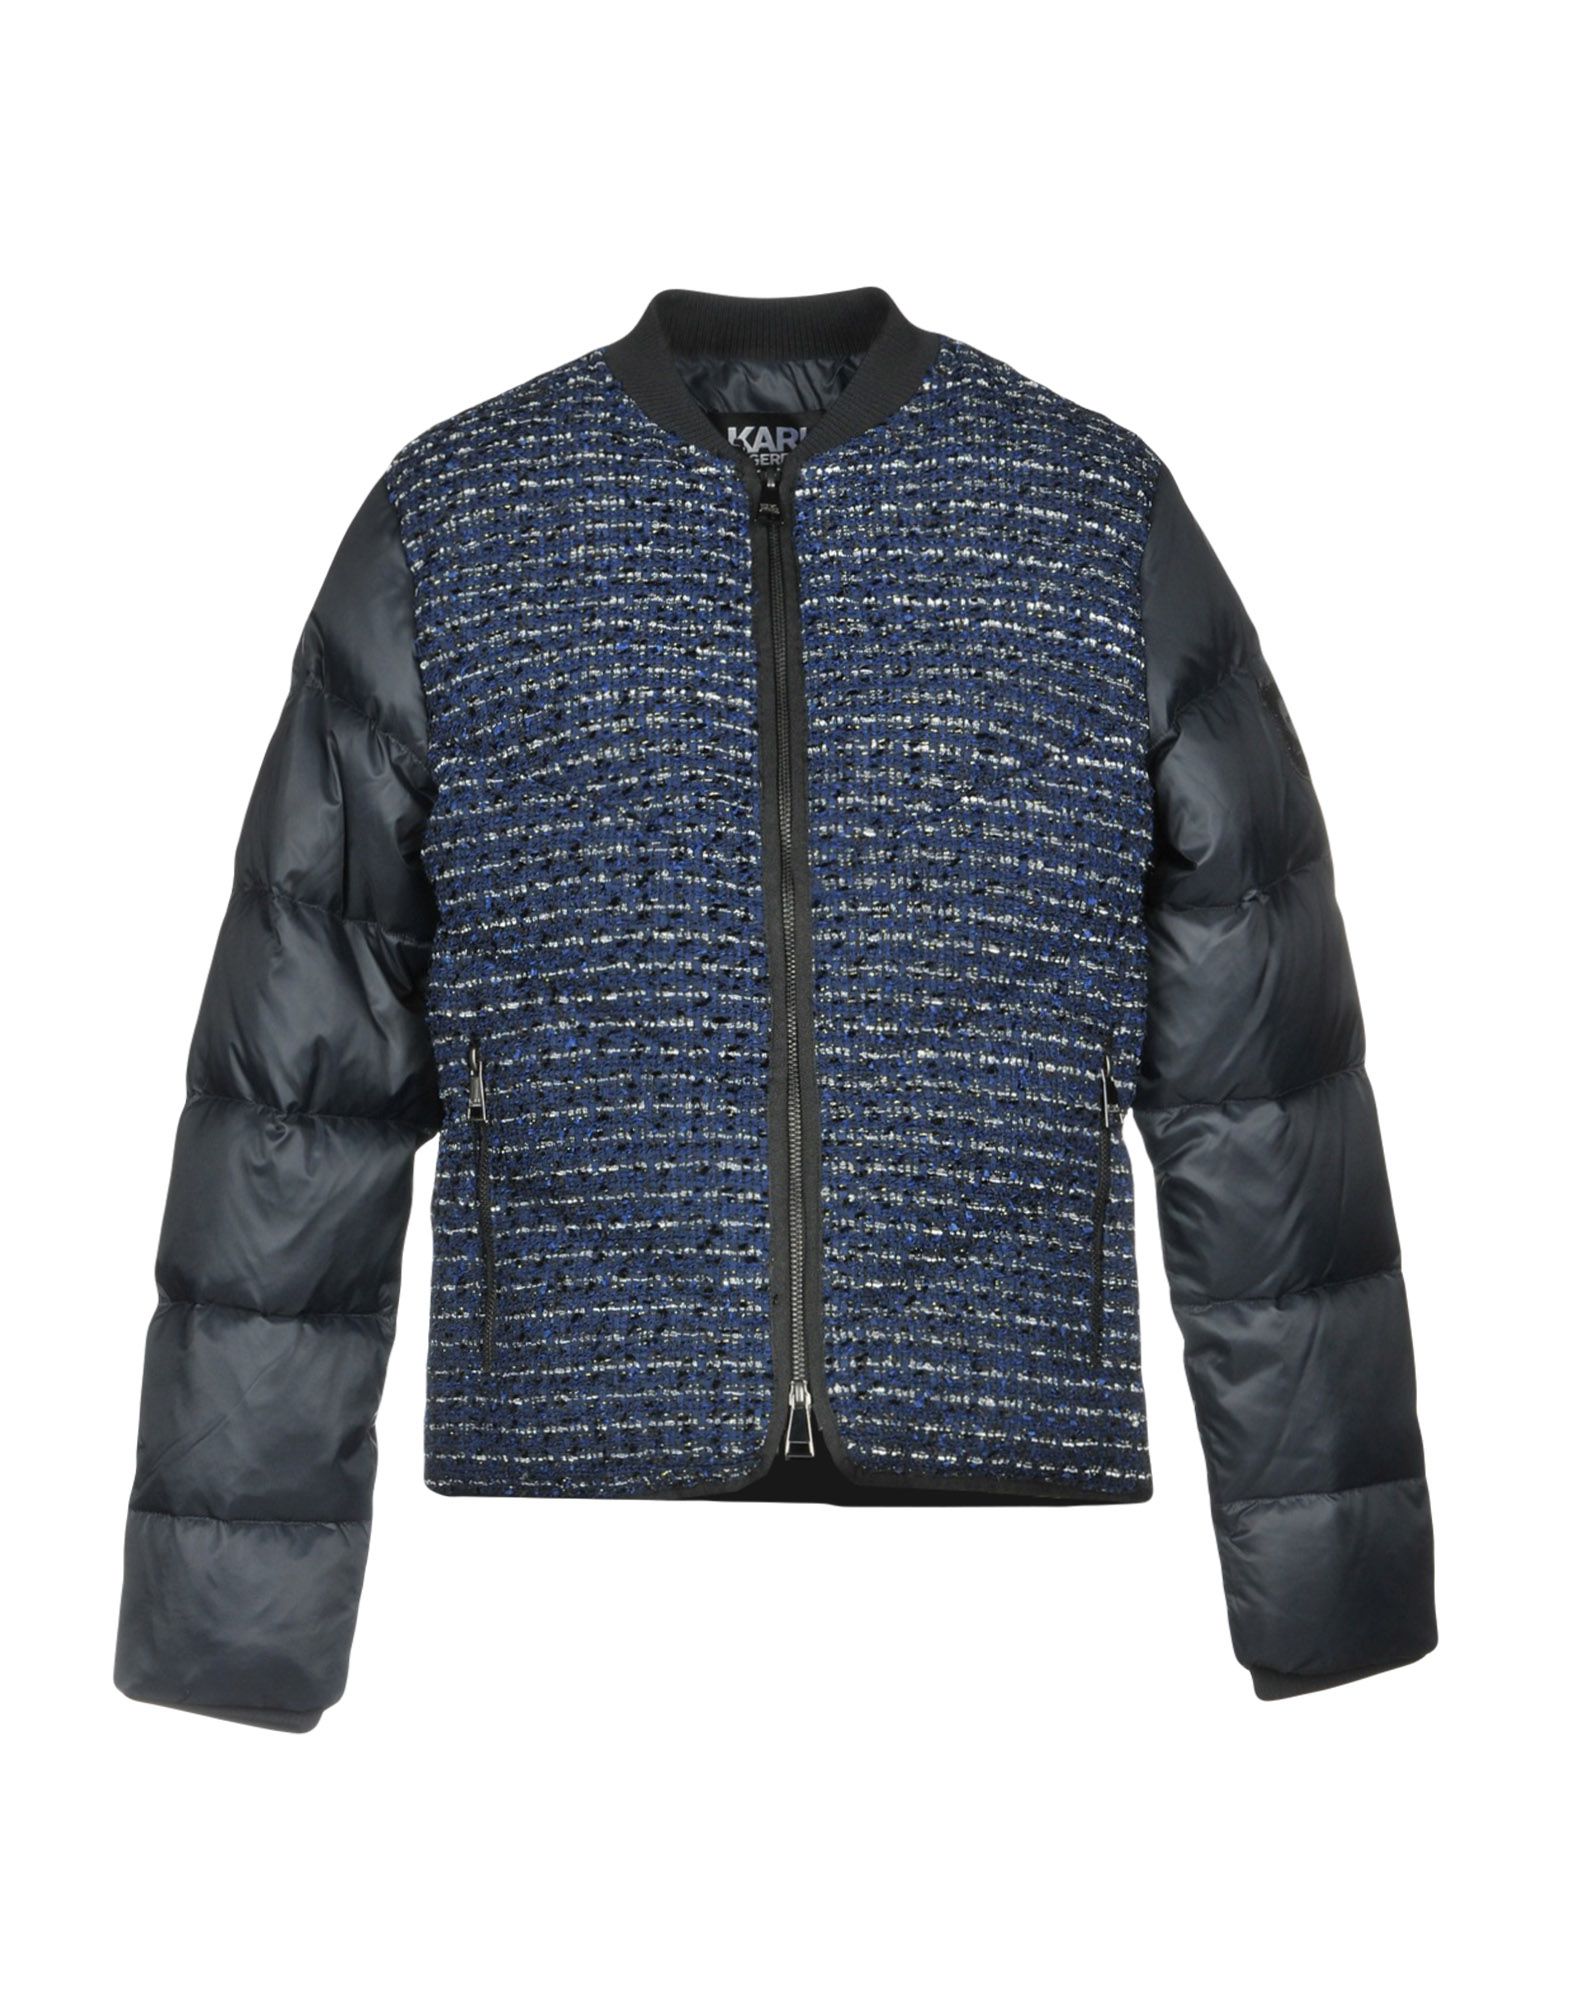 KARL LAGERFELD DOWN JACKETS,41812407BE 5